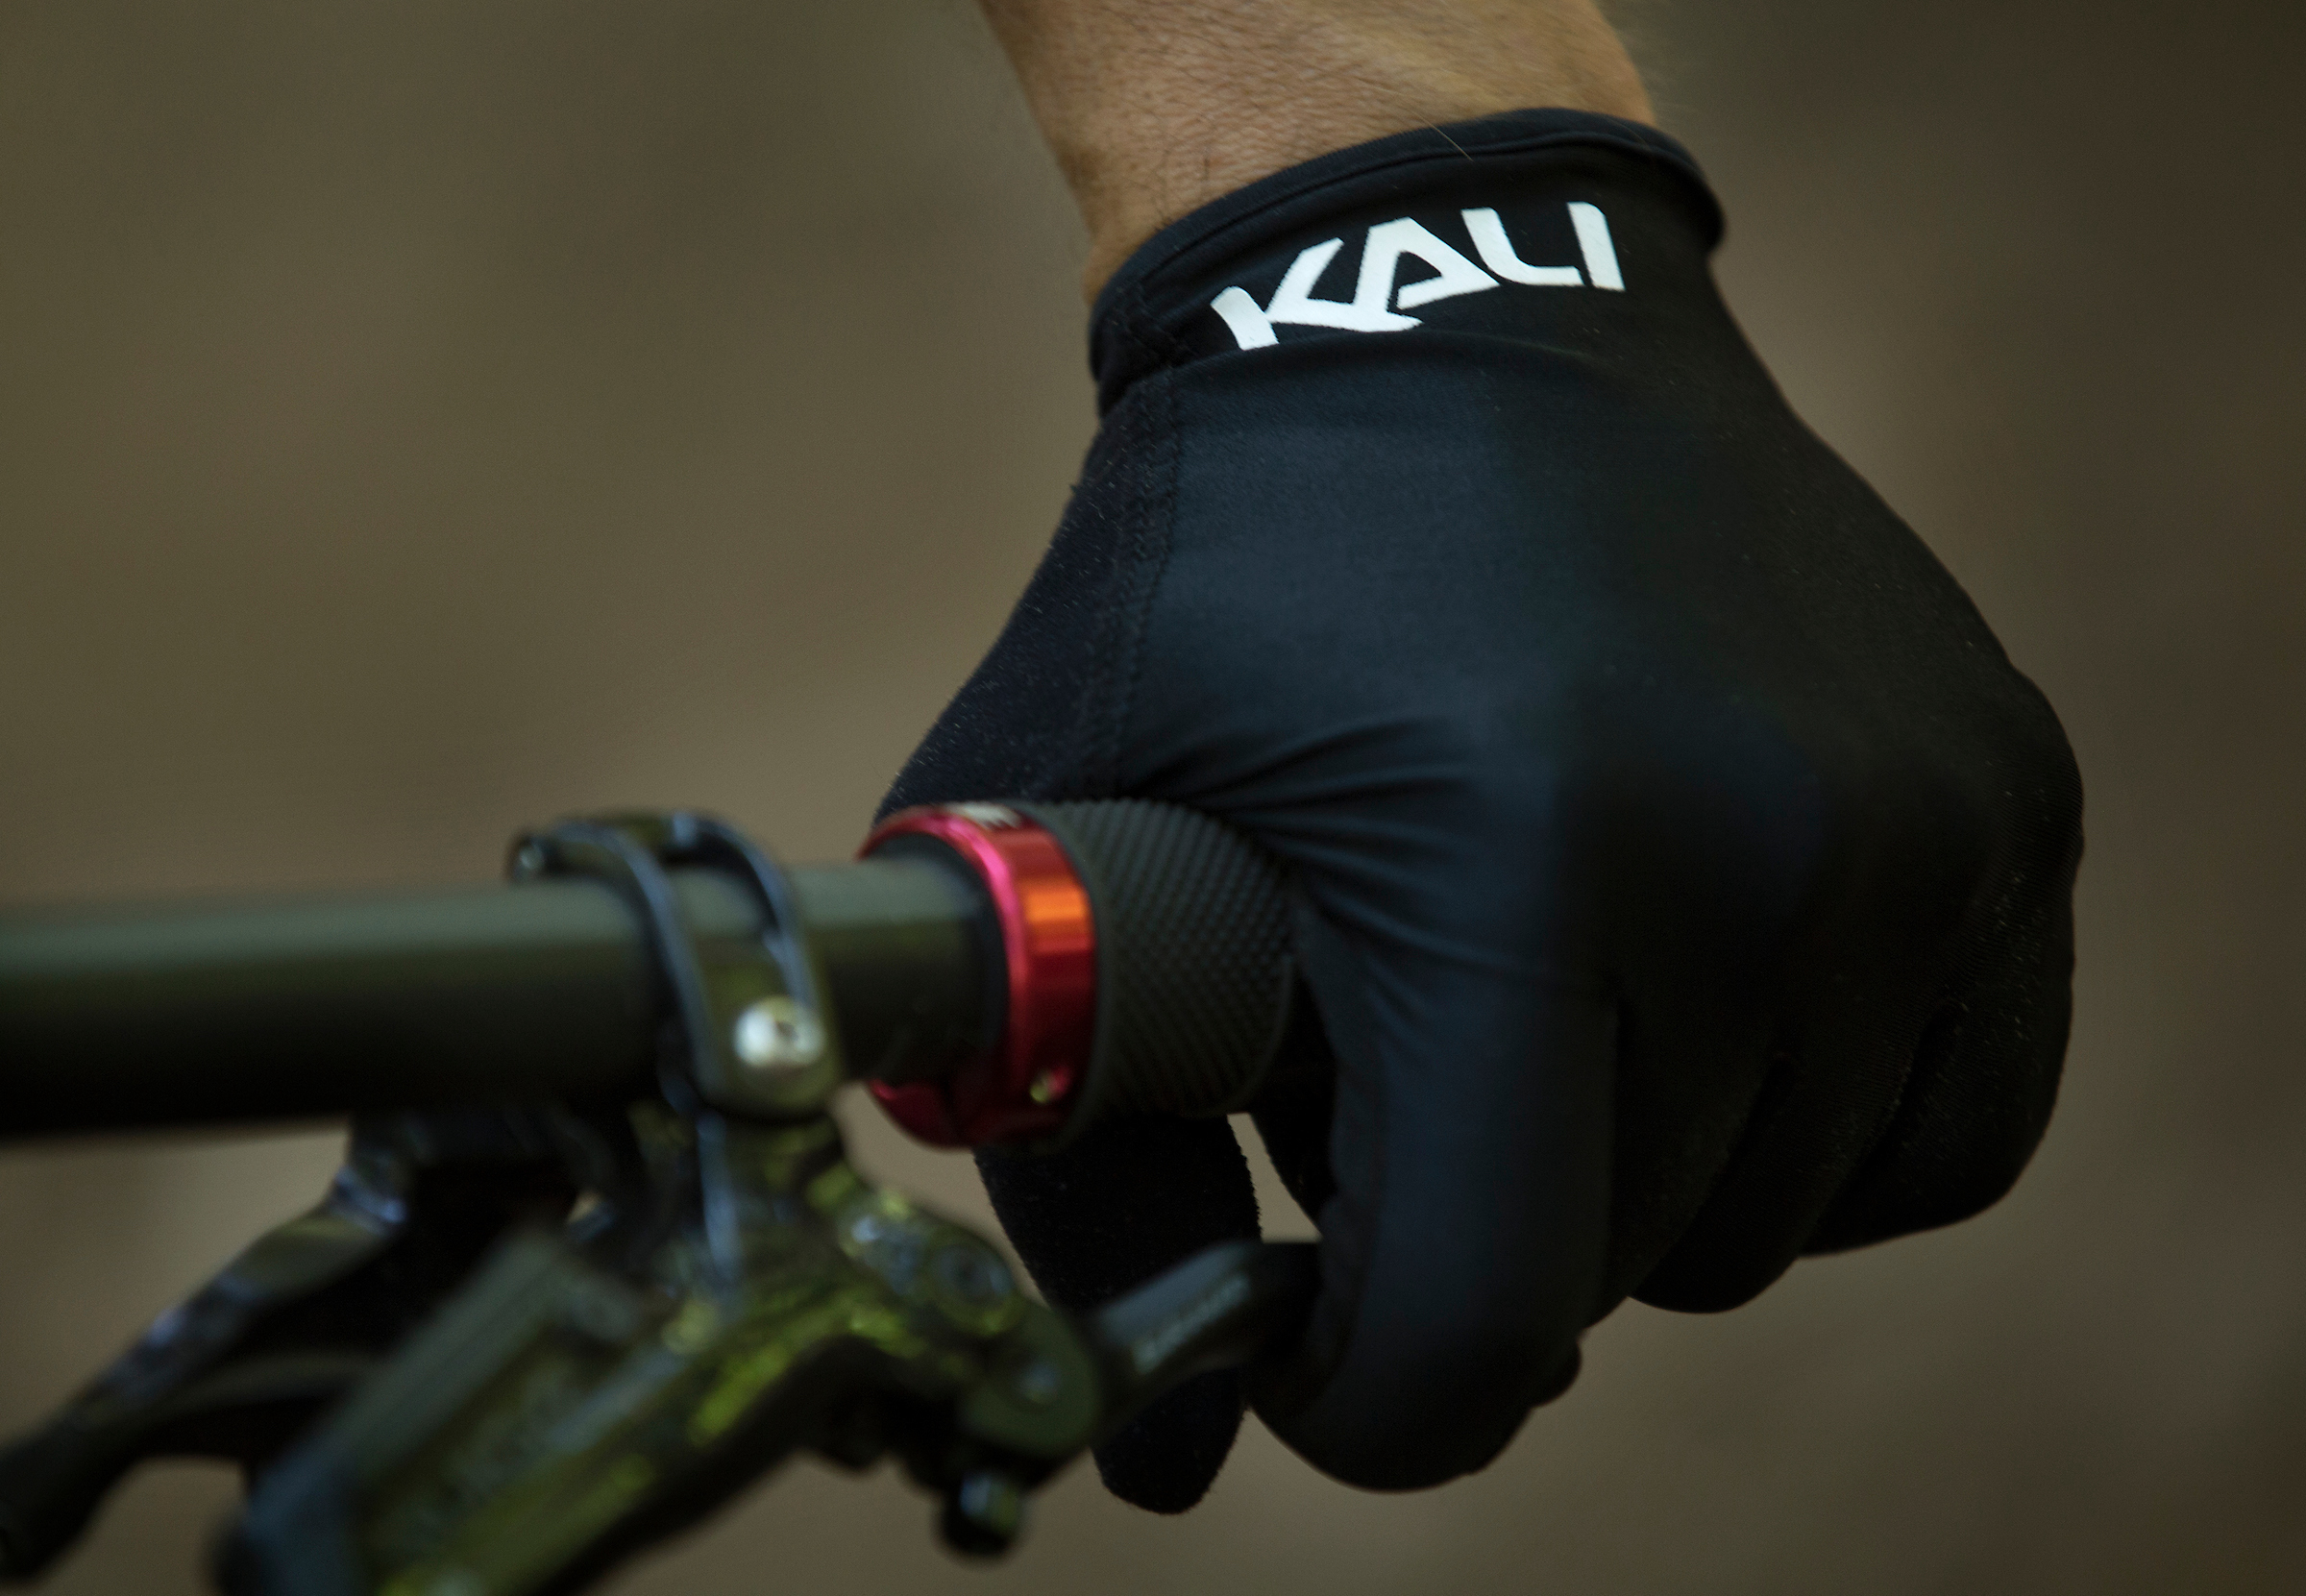 Being Distant with Kali Protectives